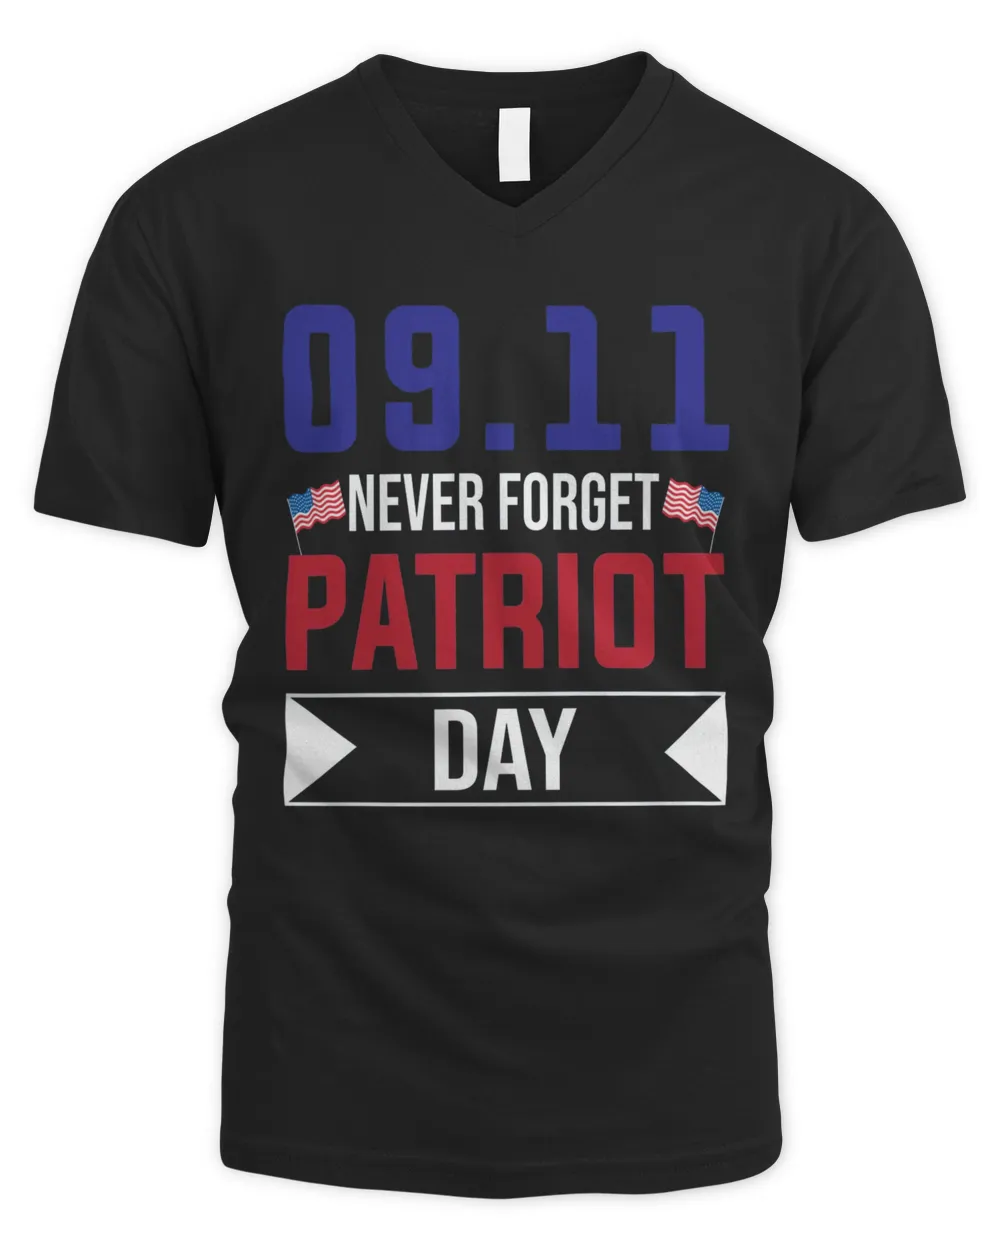 9.11 Never Forget Patriot Day T-Shirt